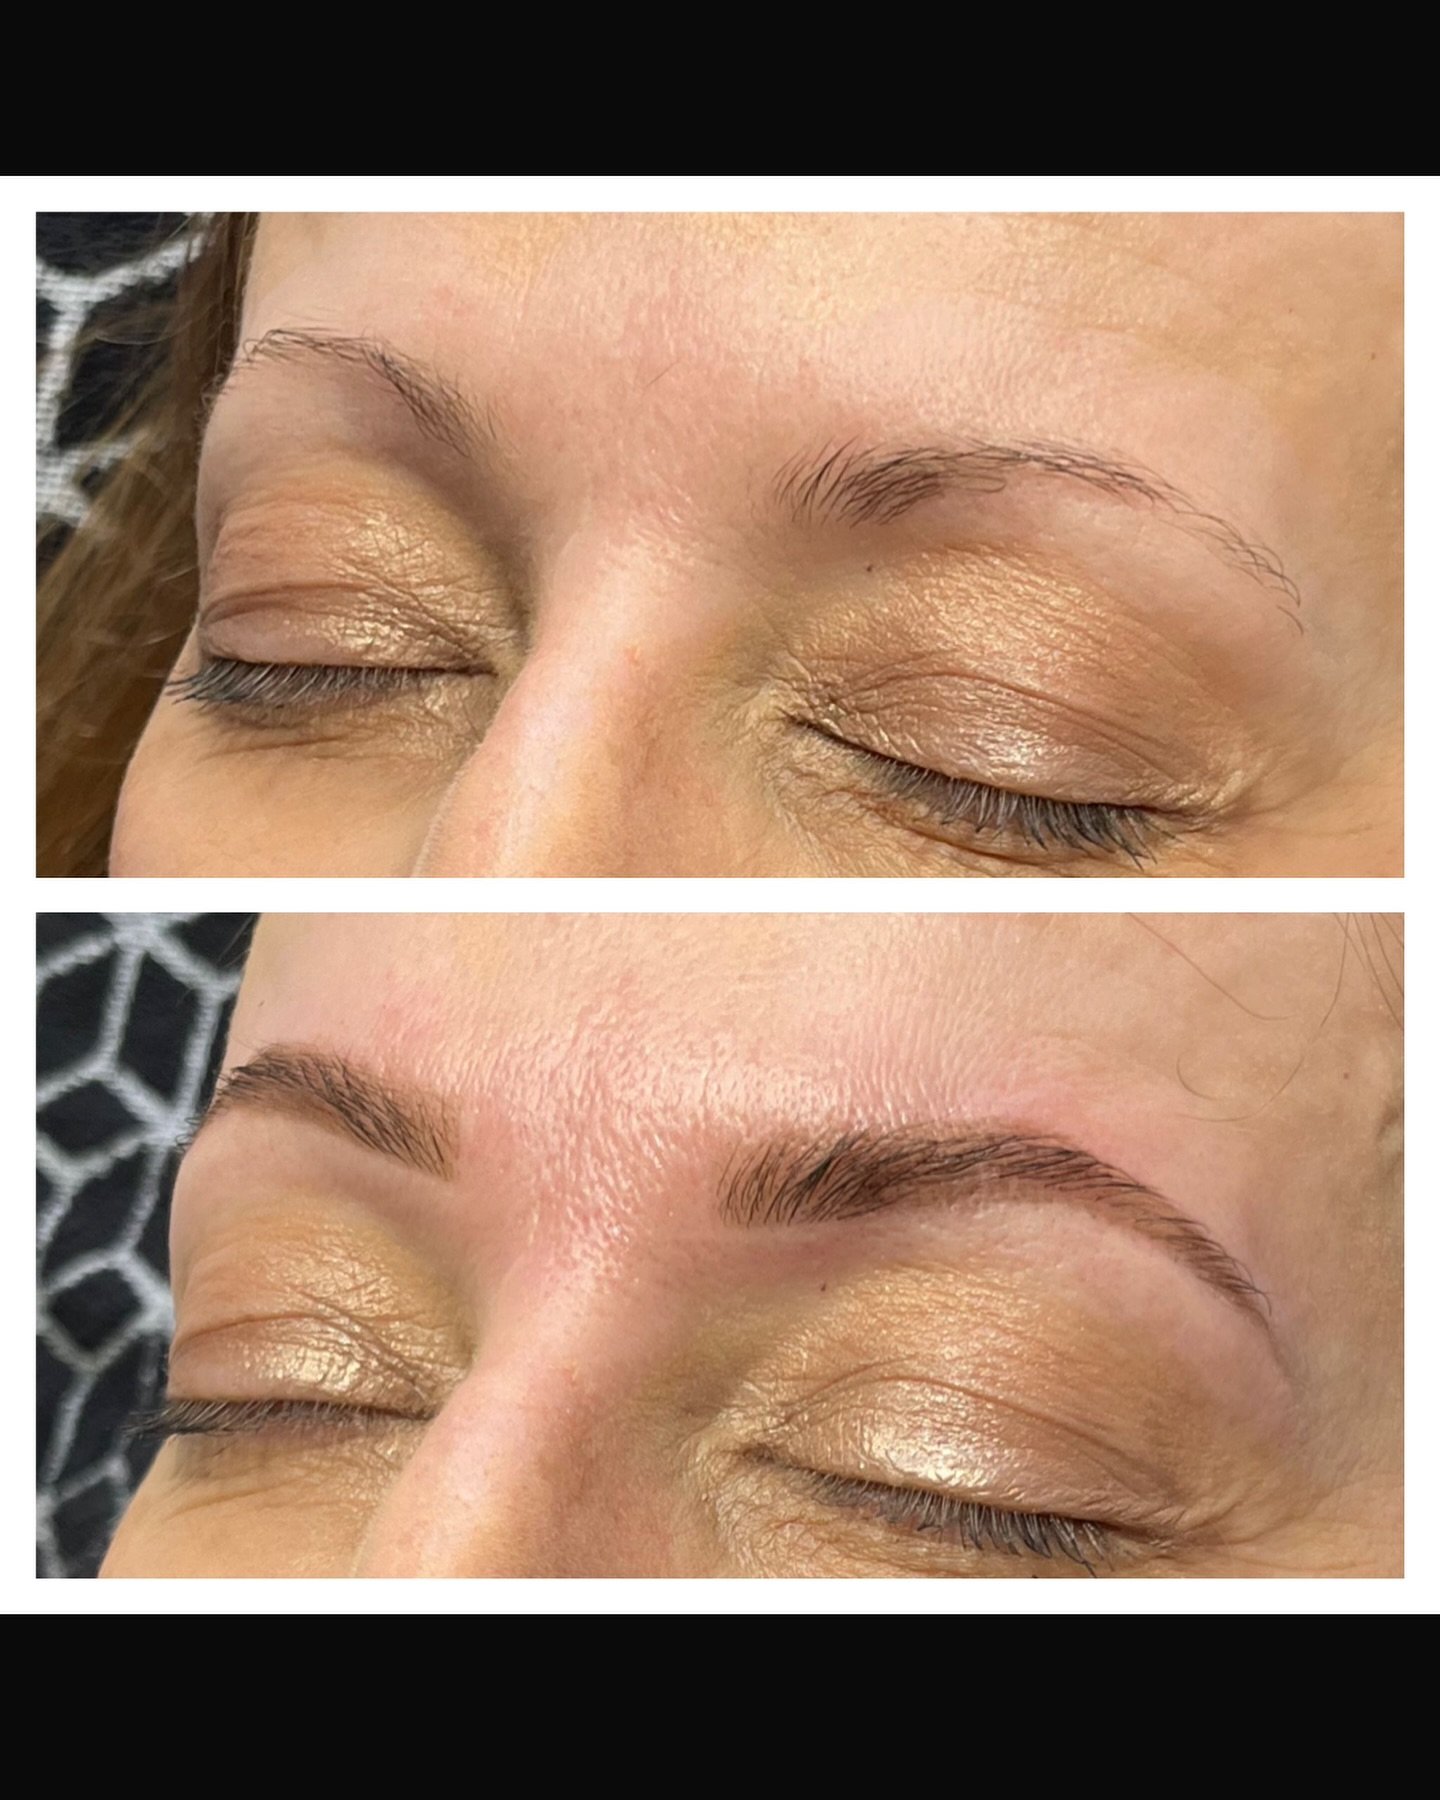 HD brows - The Process

Consultation: Tell me what you like? What you don&rsquo;t like? What you want to achieve? Let me give you guidance to help you get closer to the desired result! 

Tint: want fuller brows but don&rsquo;t want them darker? Targe